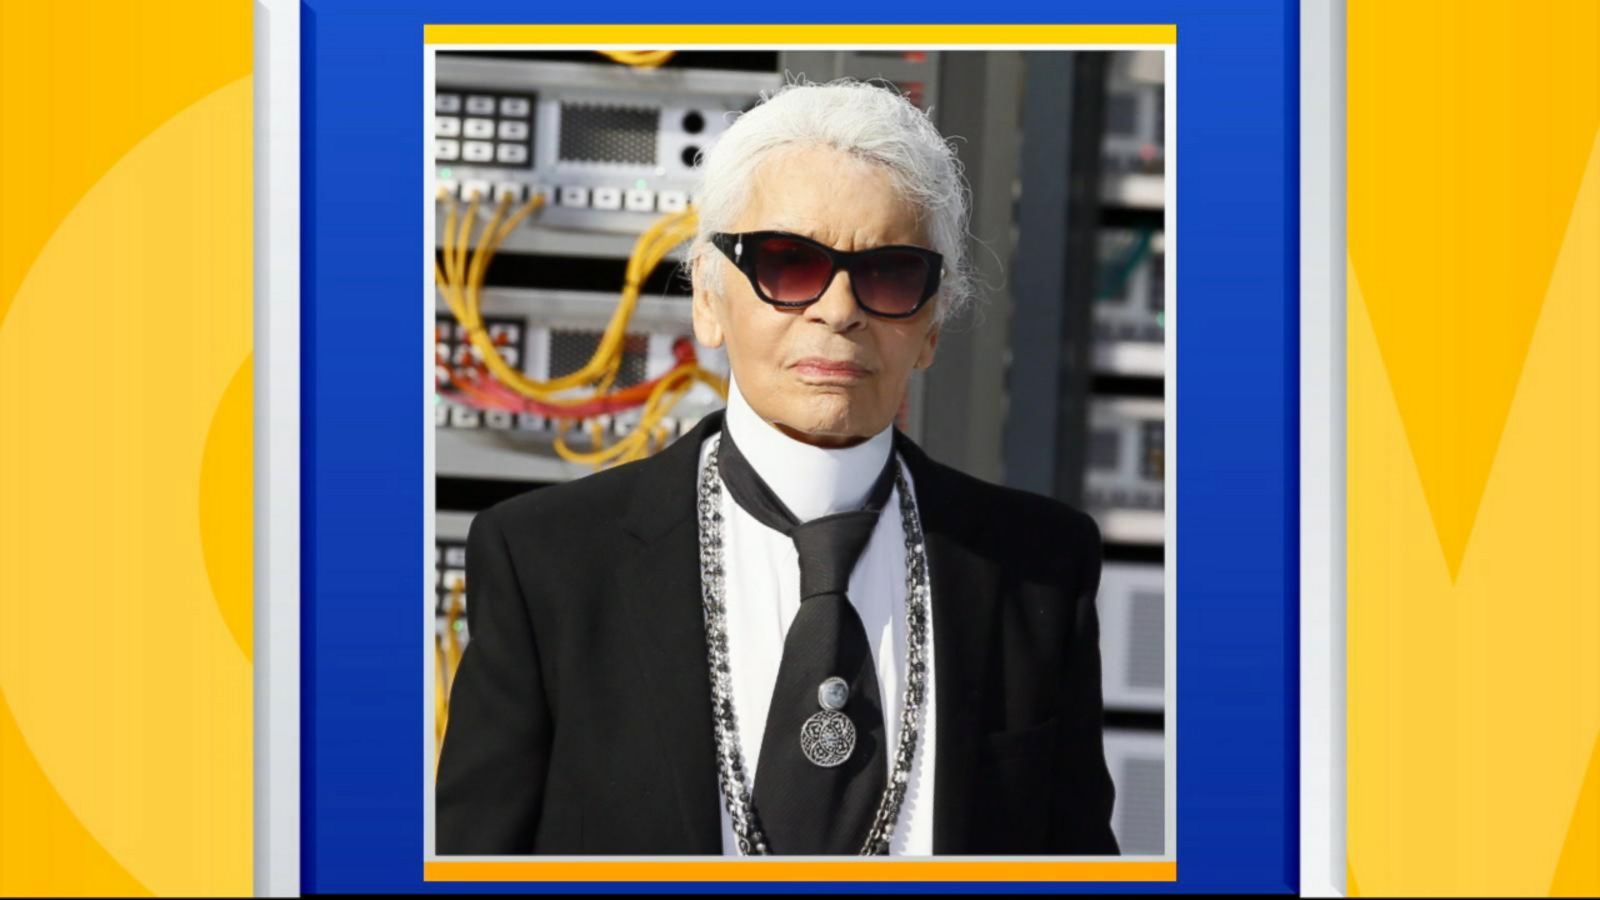 He was a bully, but we'll miss Karl Lagerfeld's brilliance, Karl Lagerfeld